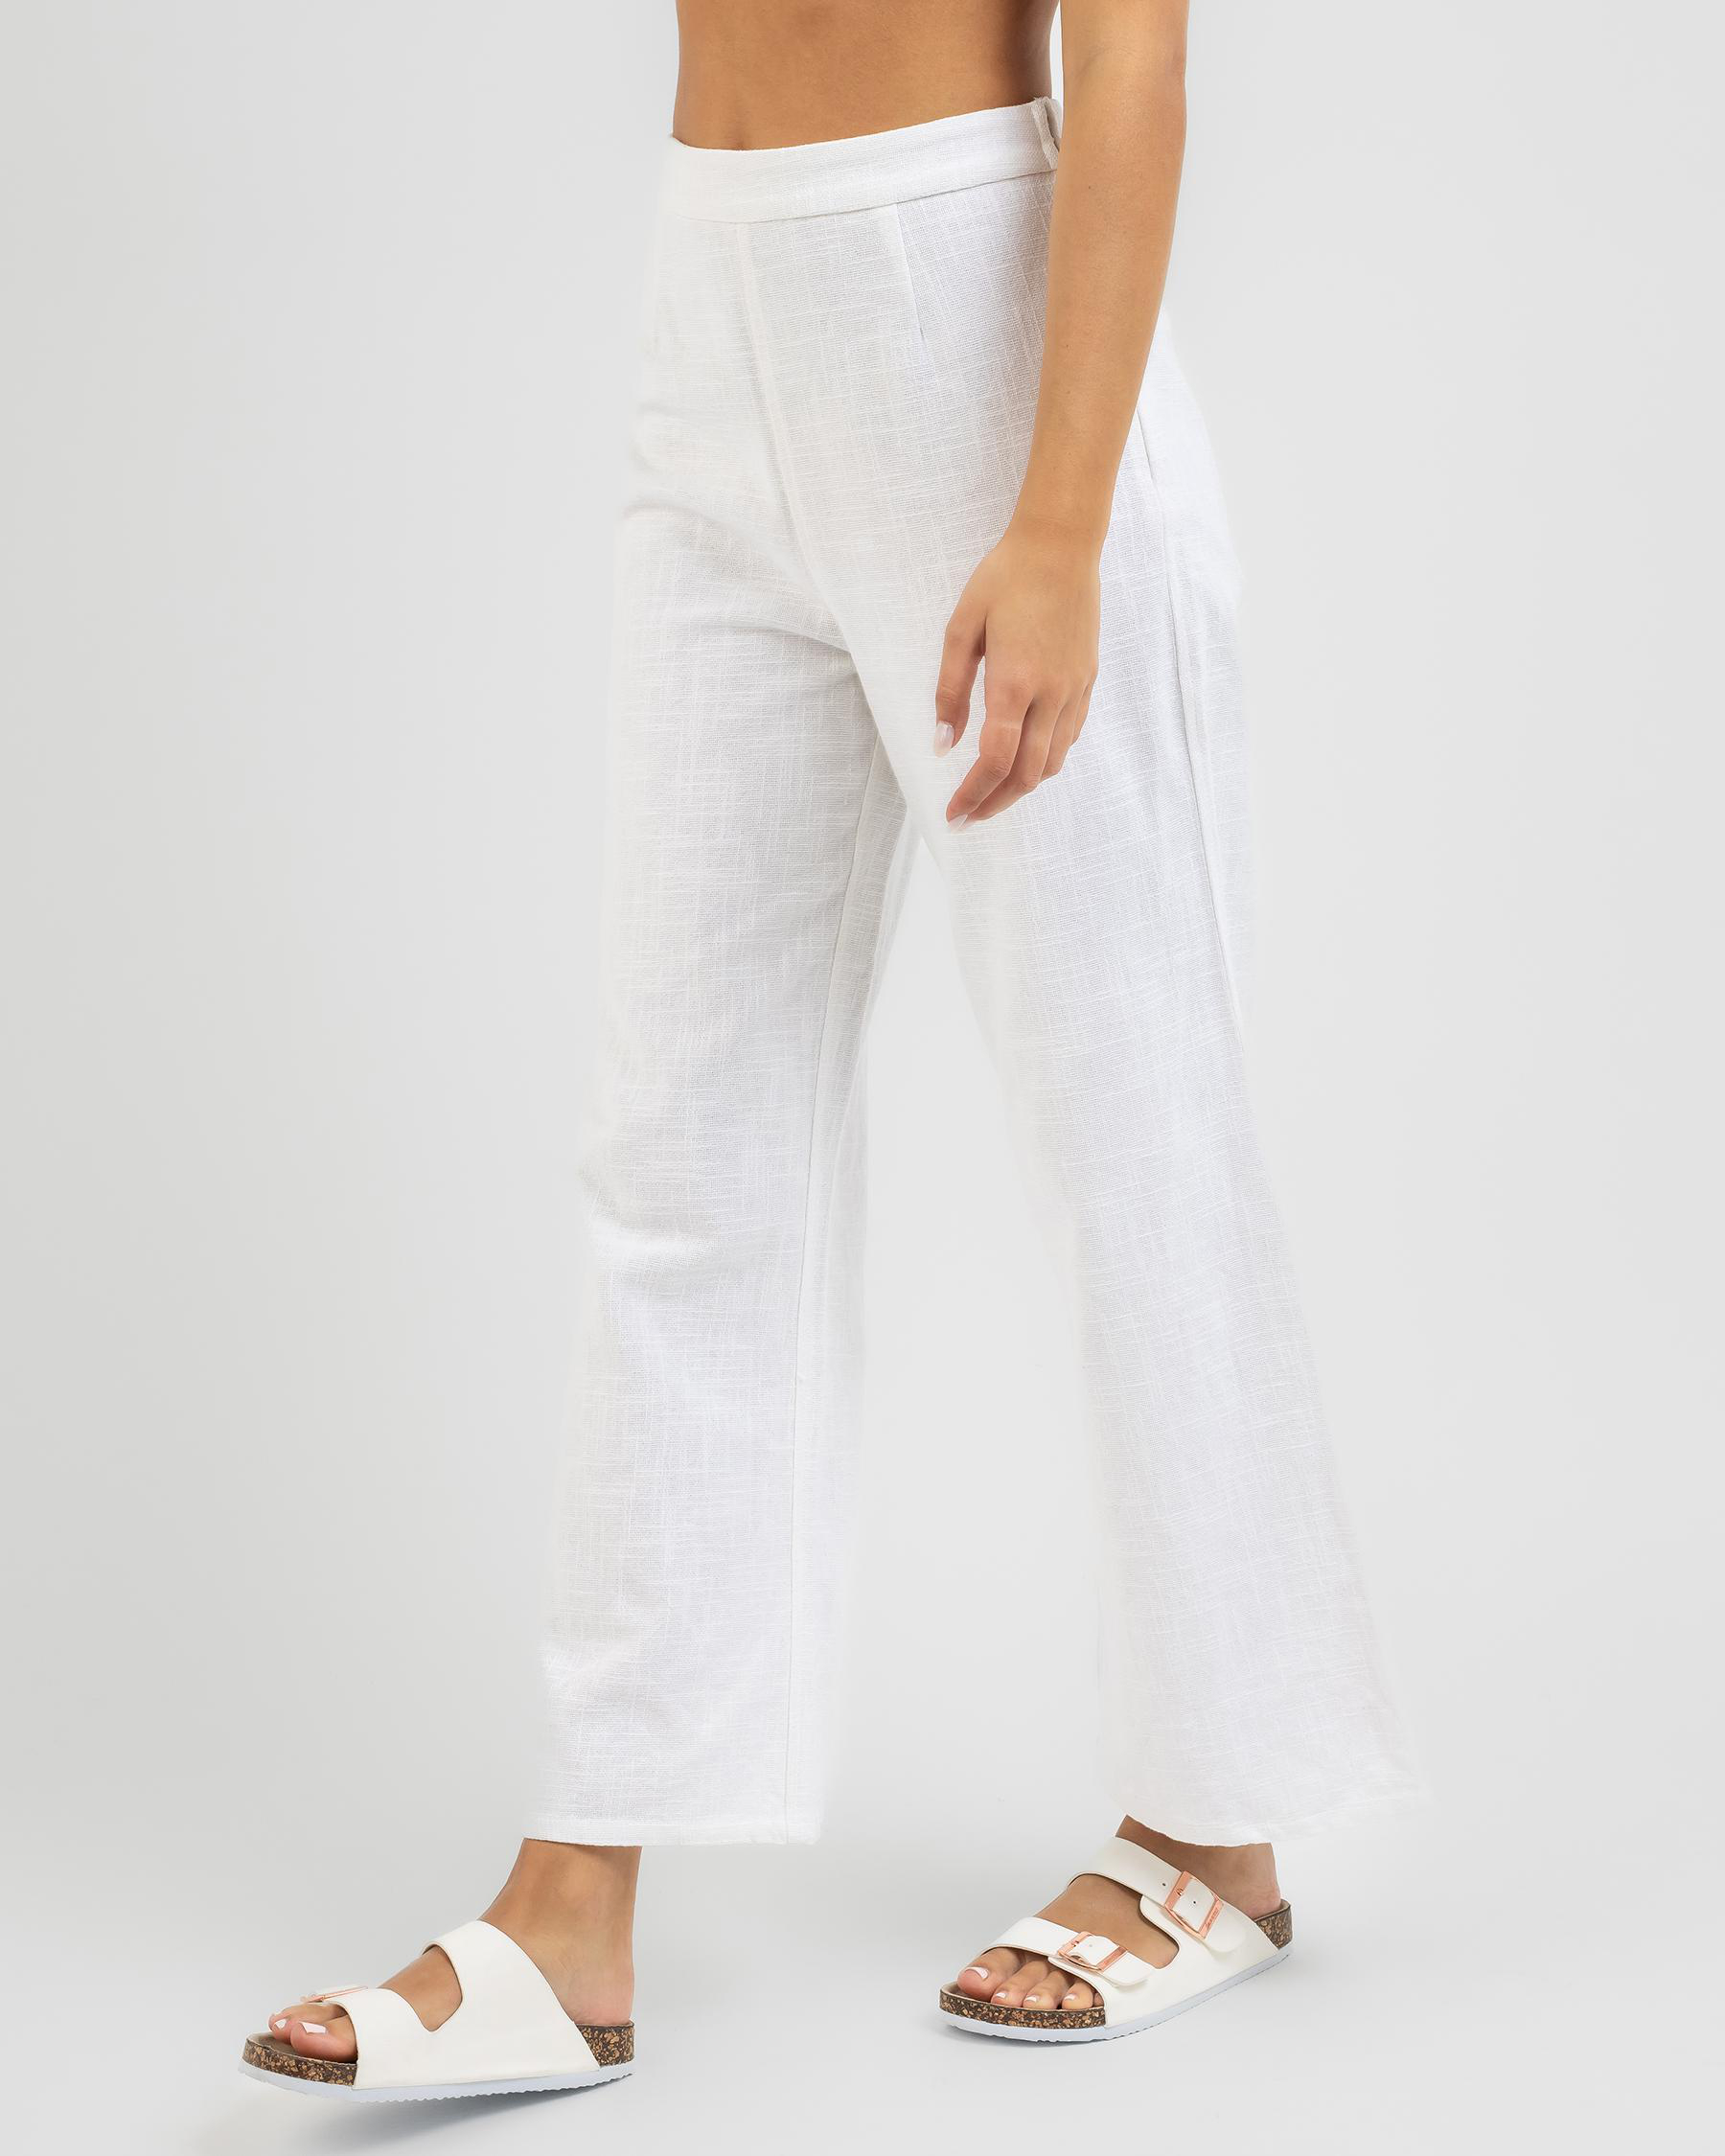 Shop Billabong On The Move Pants In White - Fast Shipping & Easy ...